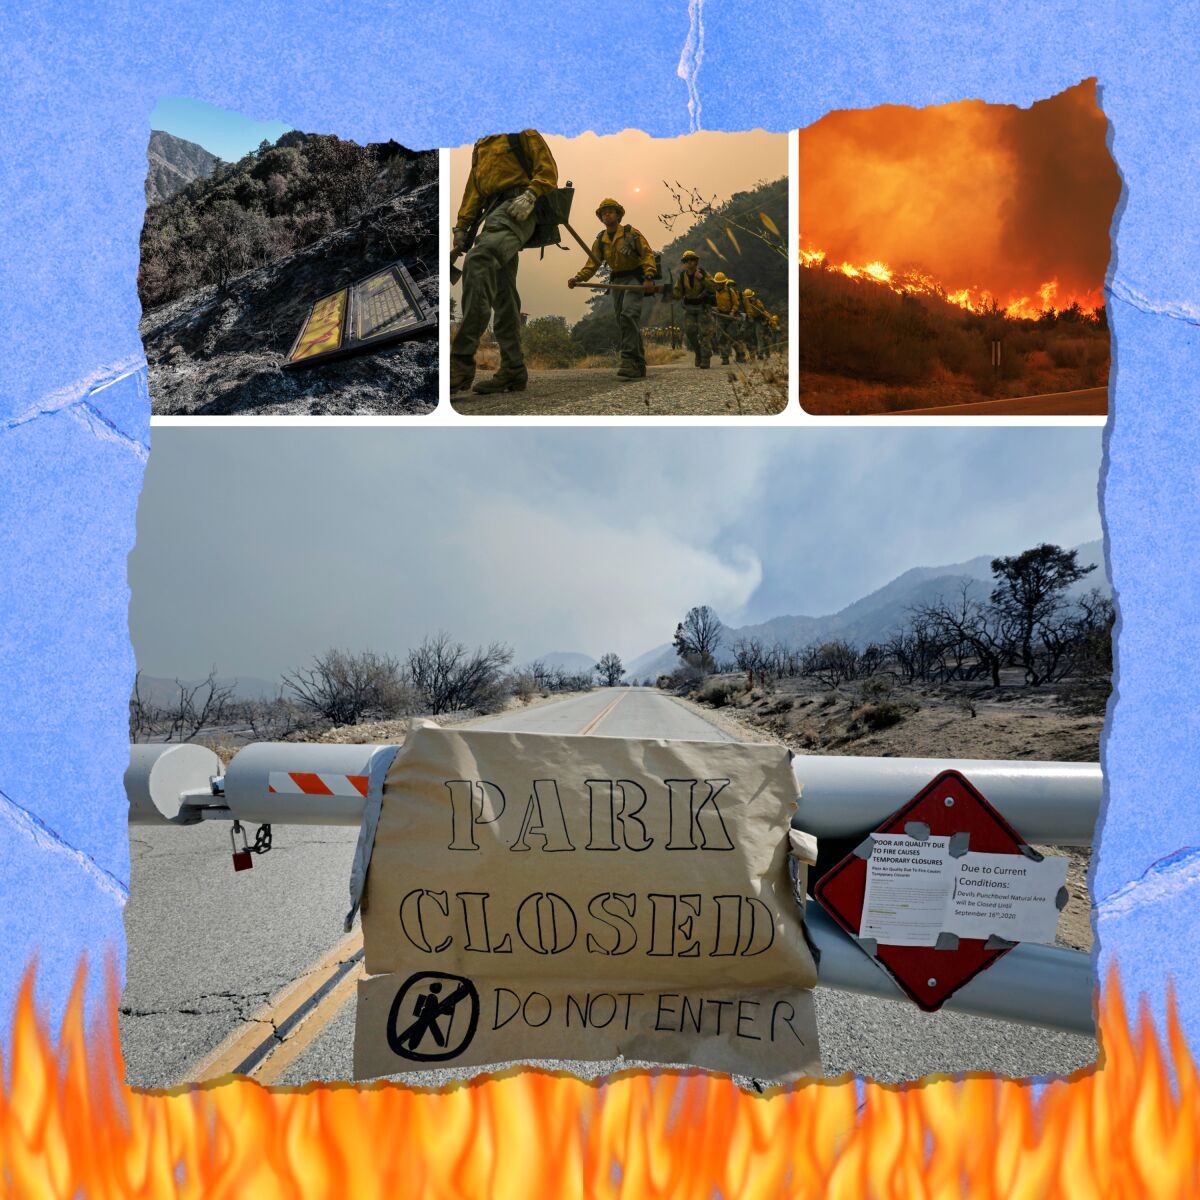 A photo collage shows scorched hills, firefighters carrying axes, intense flames and a 'Do not enter' sign.